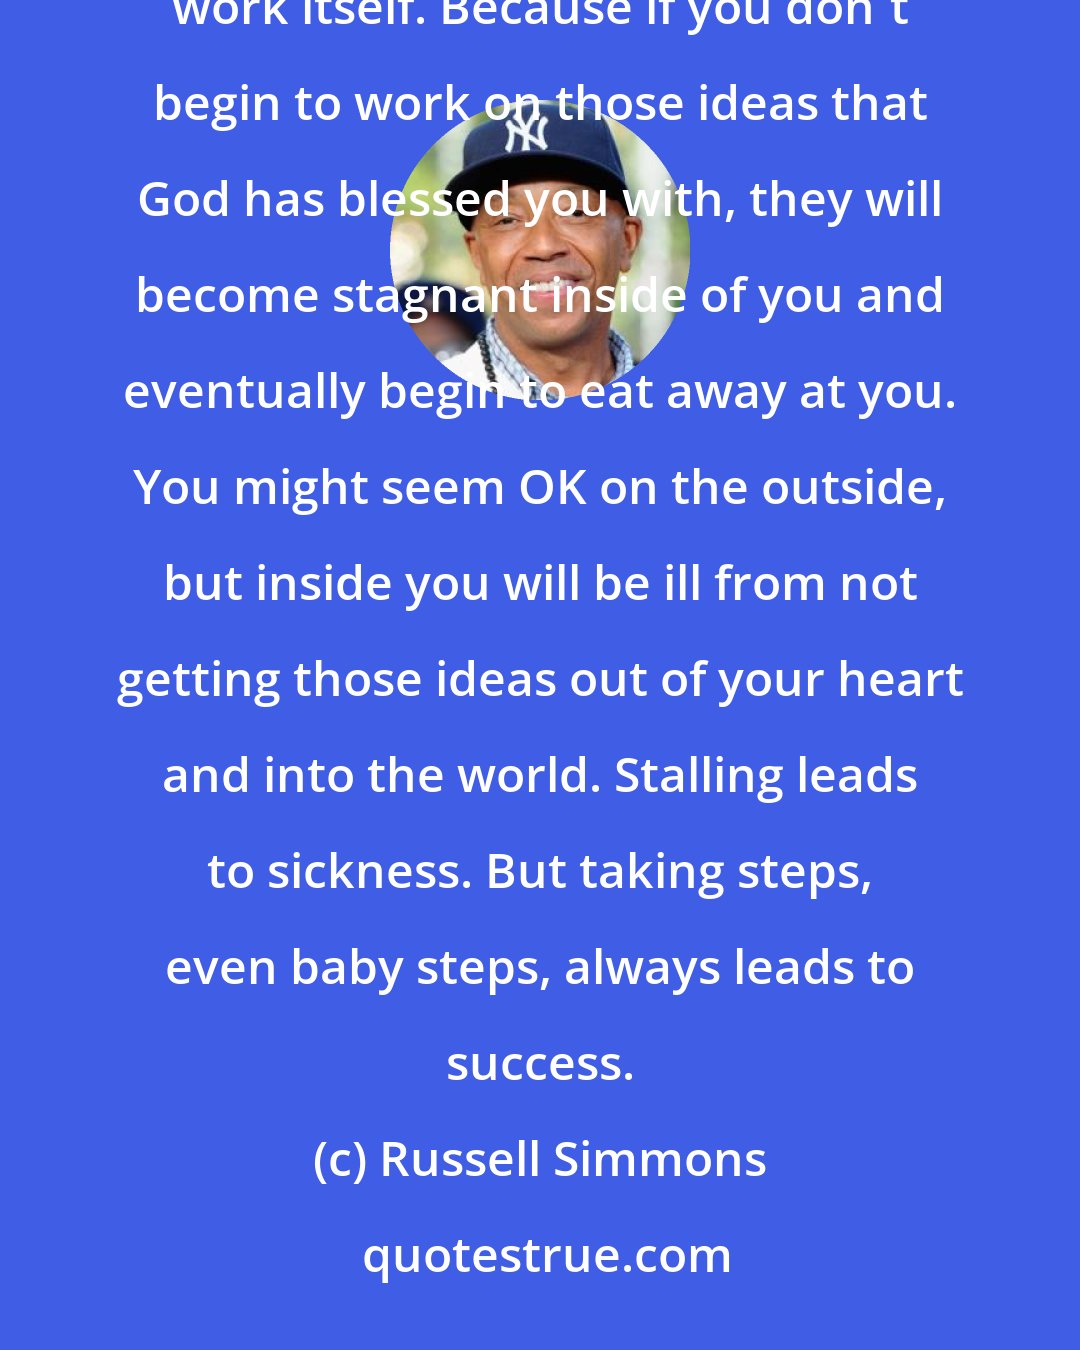 Russell Simmons: The pain that's created by avoiding hard work is actually much worse than any pain created from the actual work itself. Because if you don't begin to work on those ideas that God has blessed you with, they will become stagnant inside of you and eventually begin to eat away at you. You might seem OK on the outside, but inside you will be ill from not getting those ideas out of your heart and into the world. Stalling leads to sickness. But taking steps, even baby steps, always leads to success.